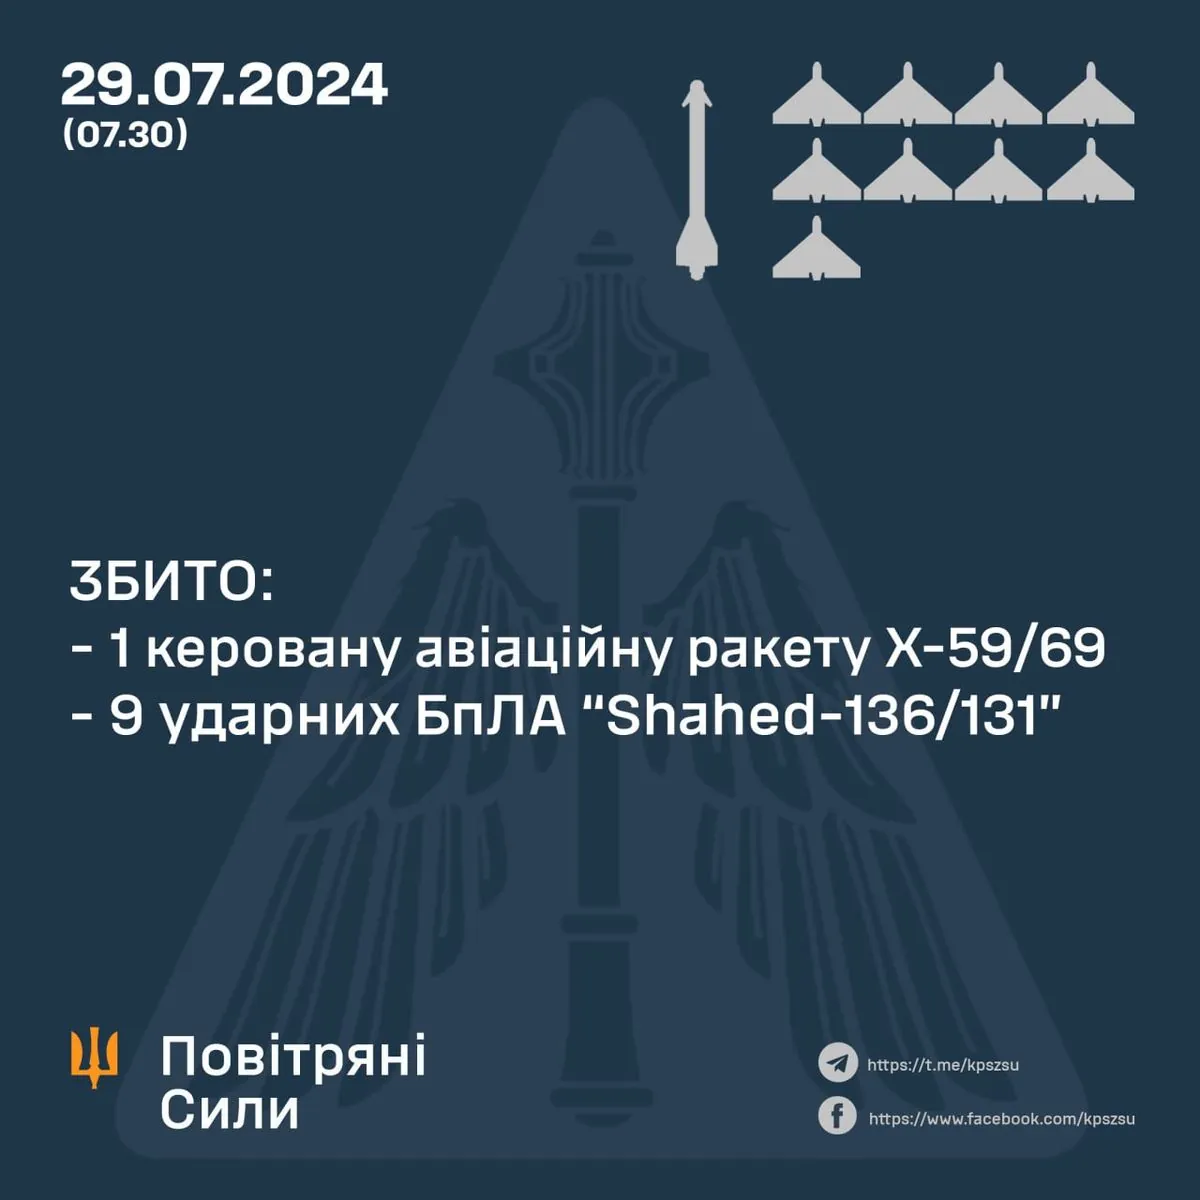 During the night attack, Ukrainian forces shot down an X-59/X-69 missile and 9 Shahed drones